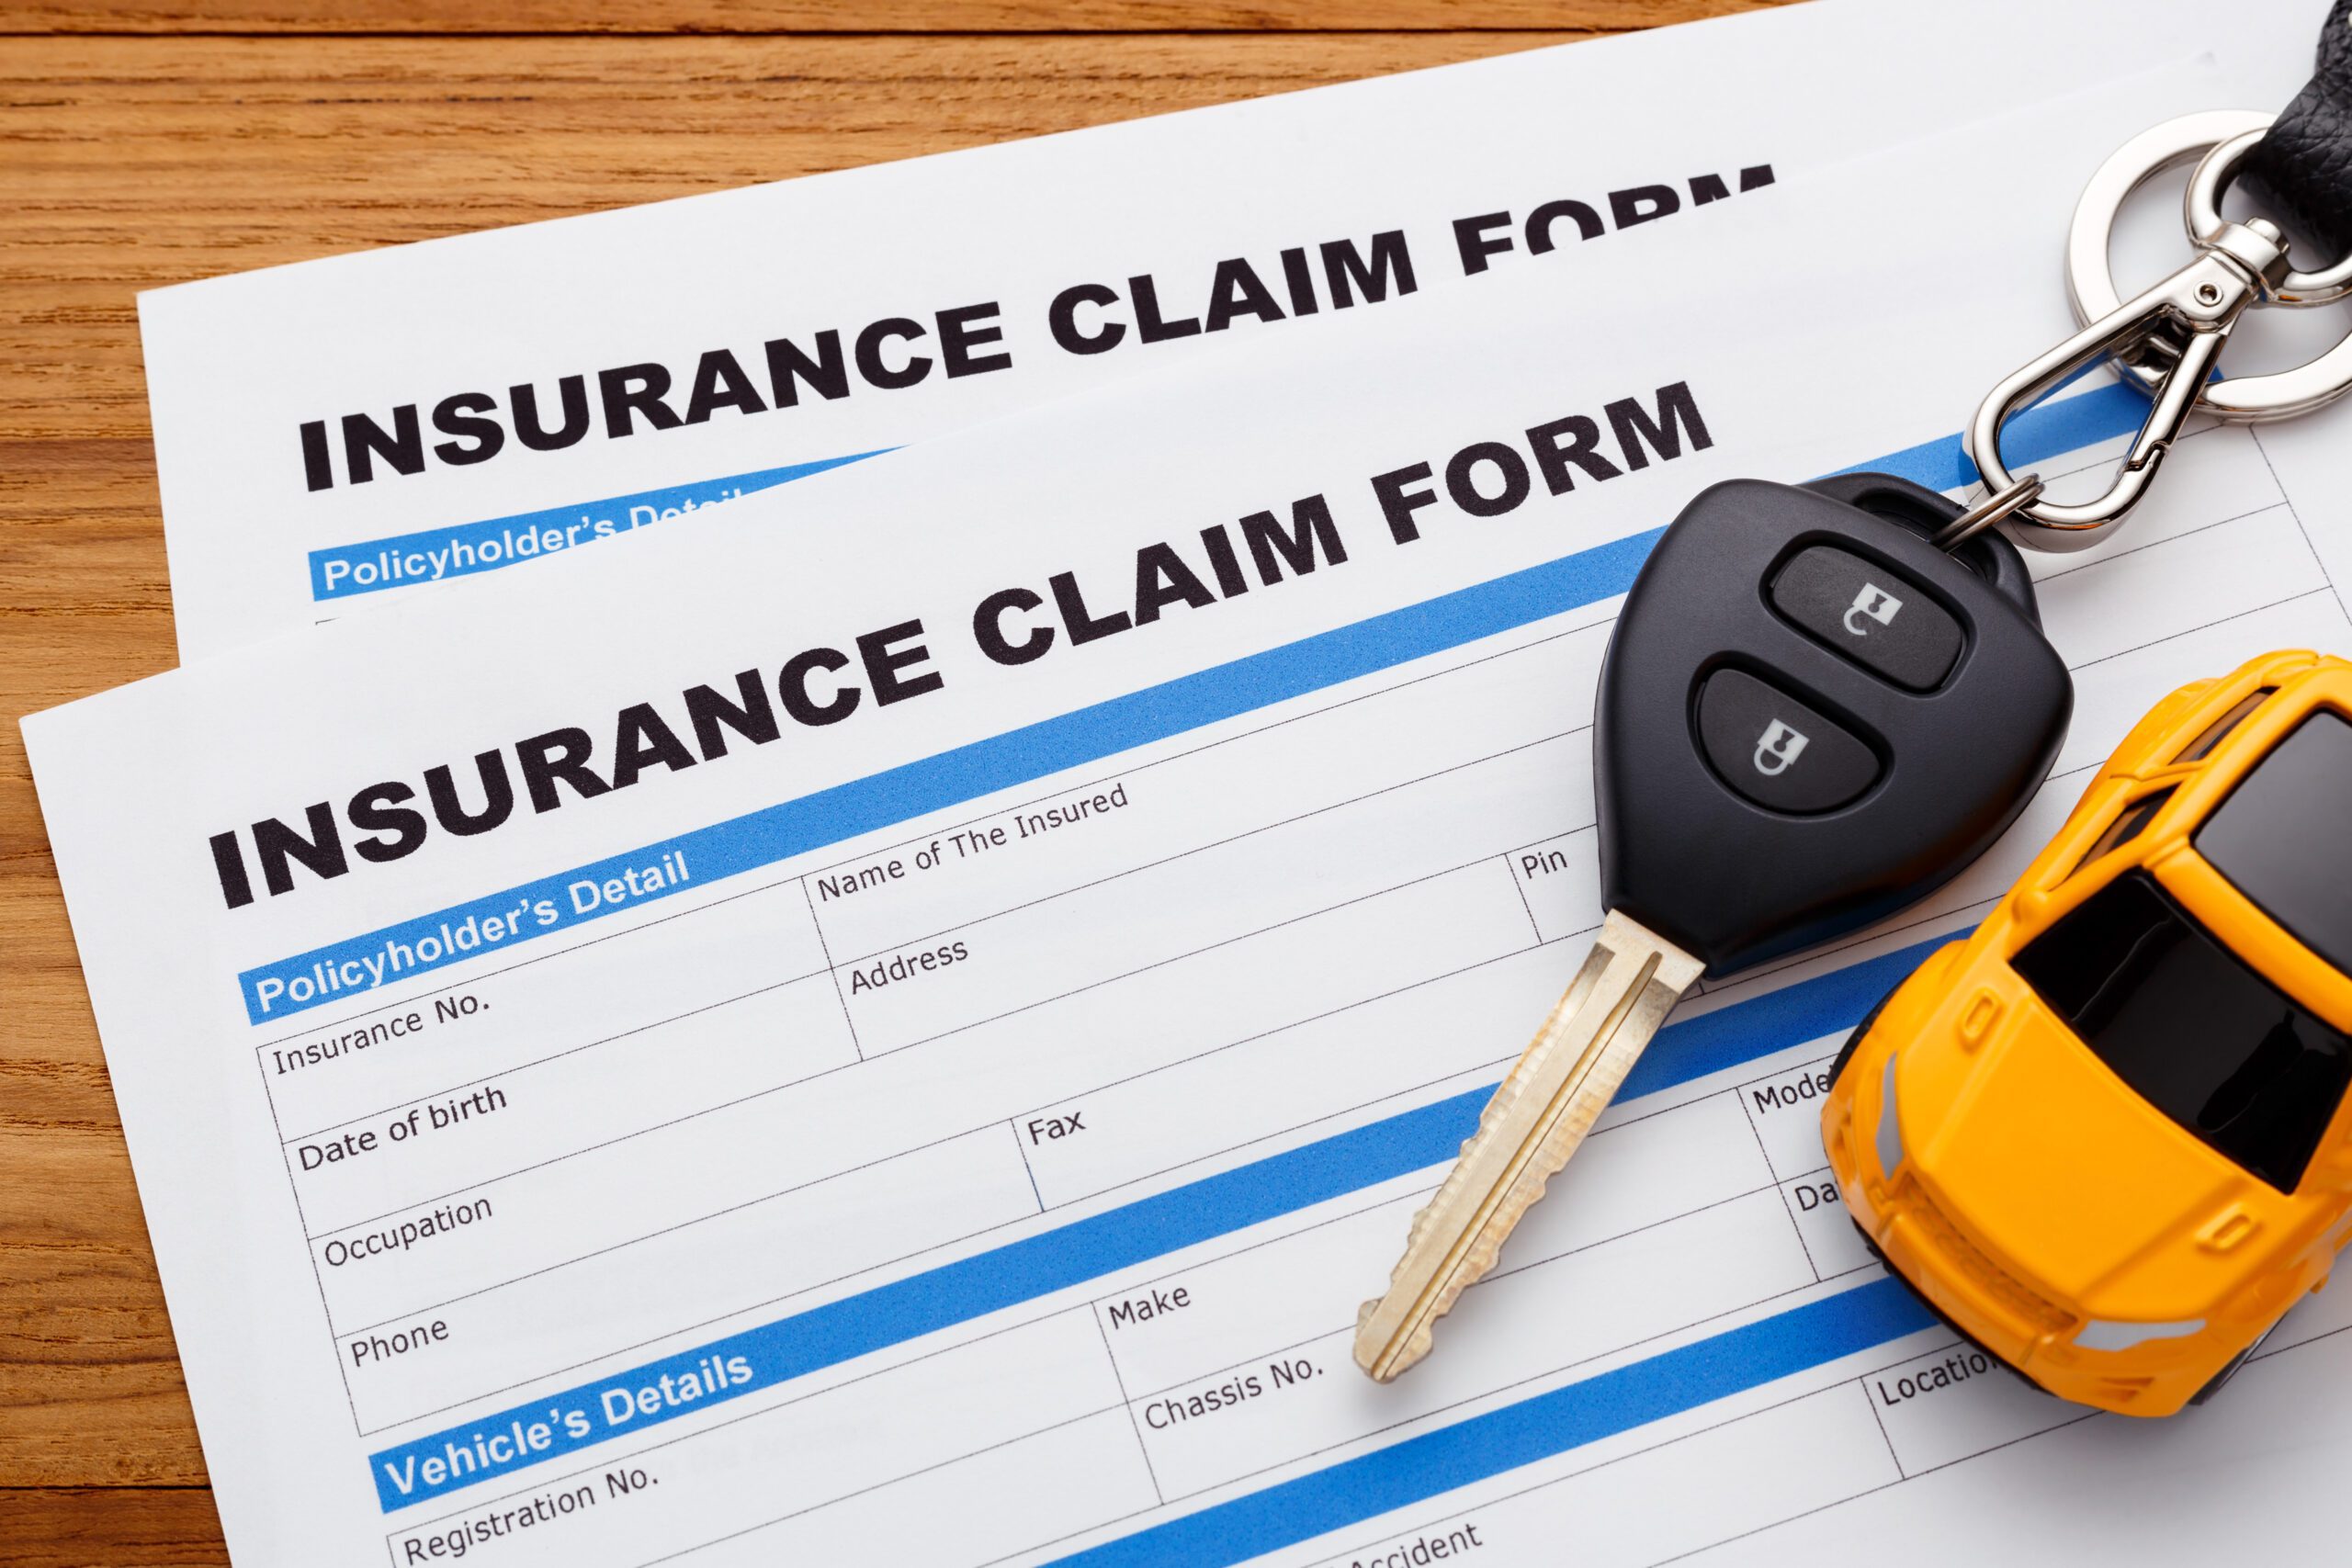 An image of two insurance claim forms with car keys on top of the forms, implying it’s car insurance claim forms.